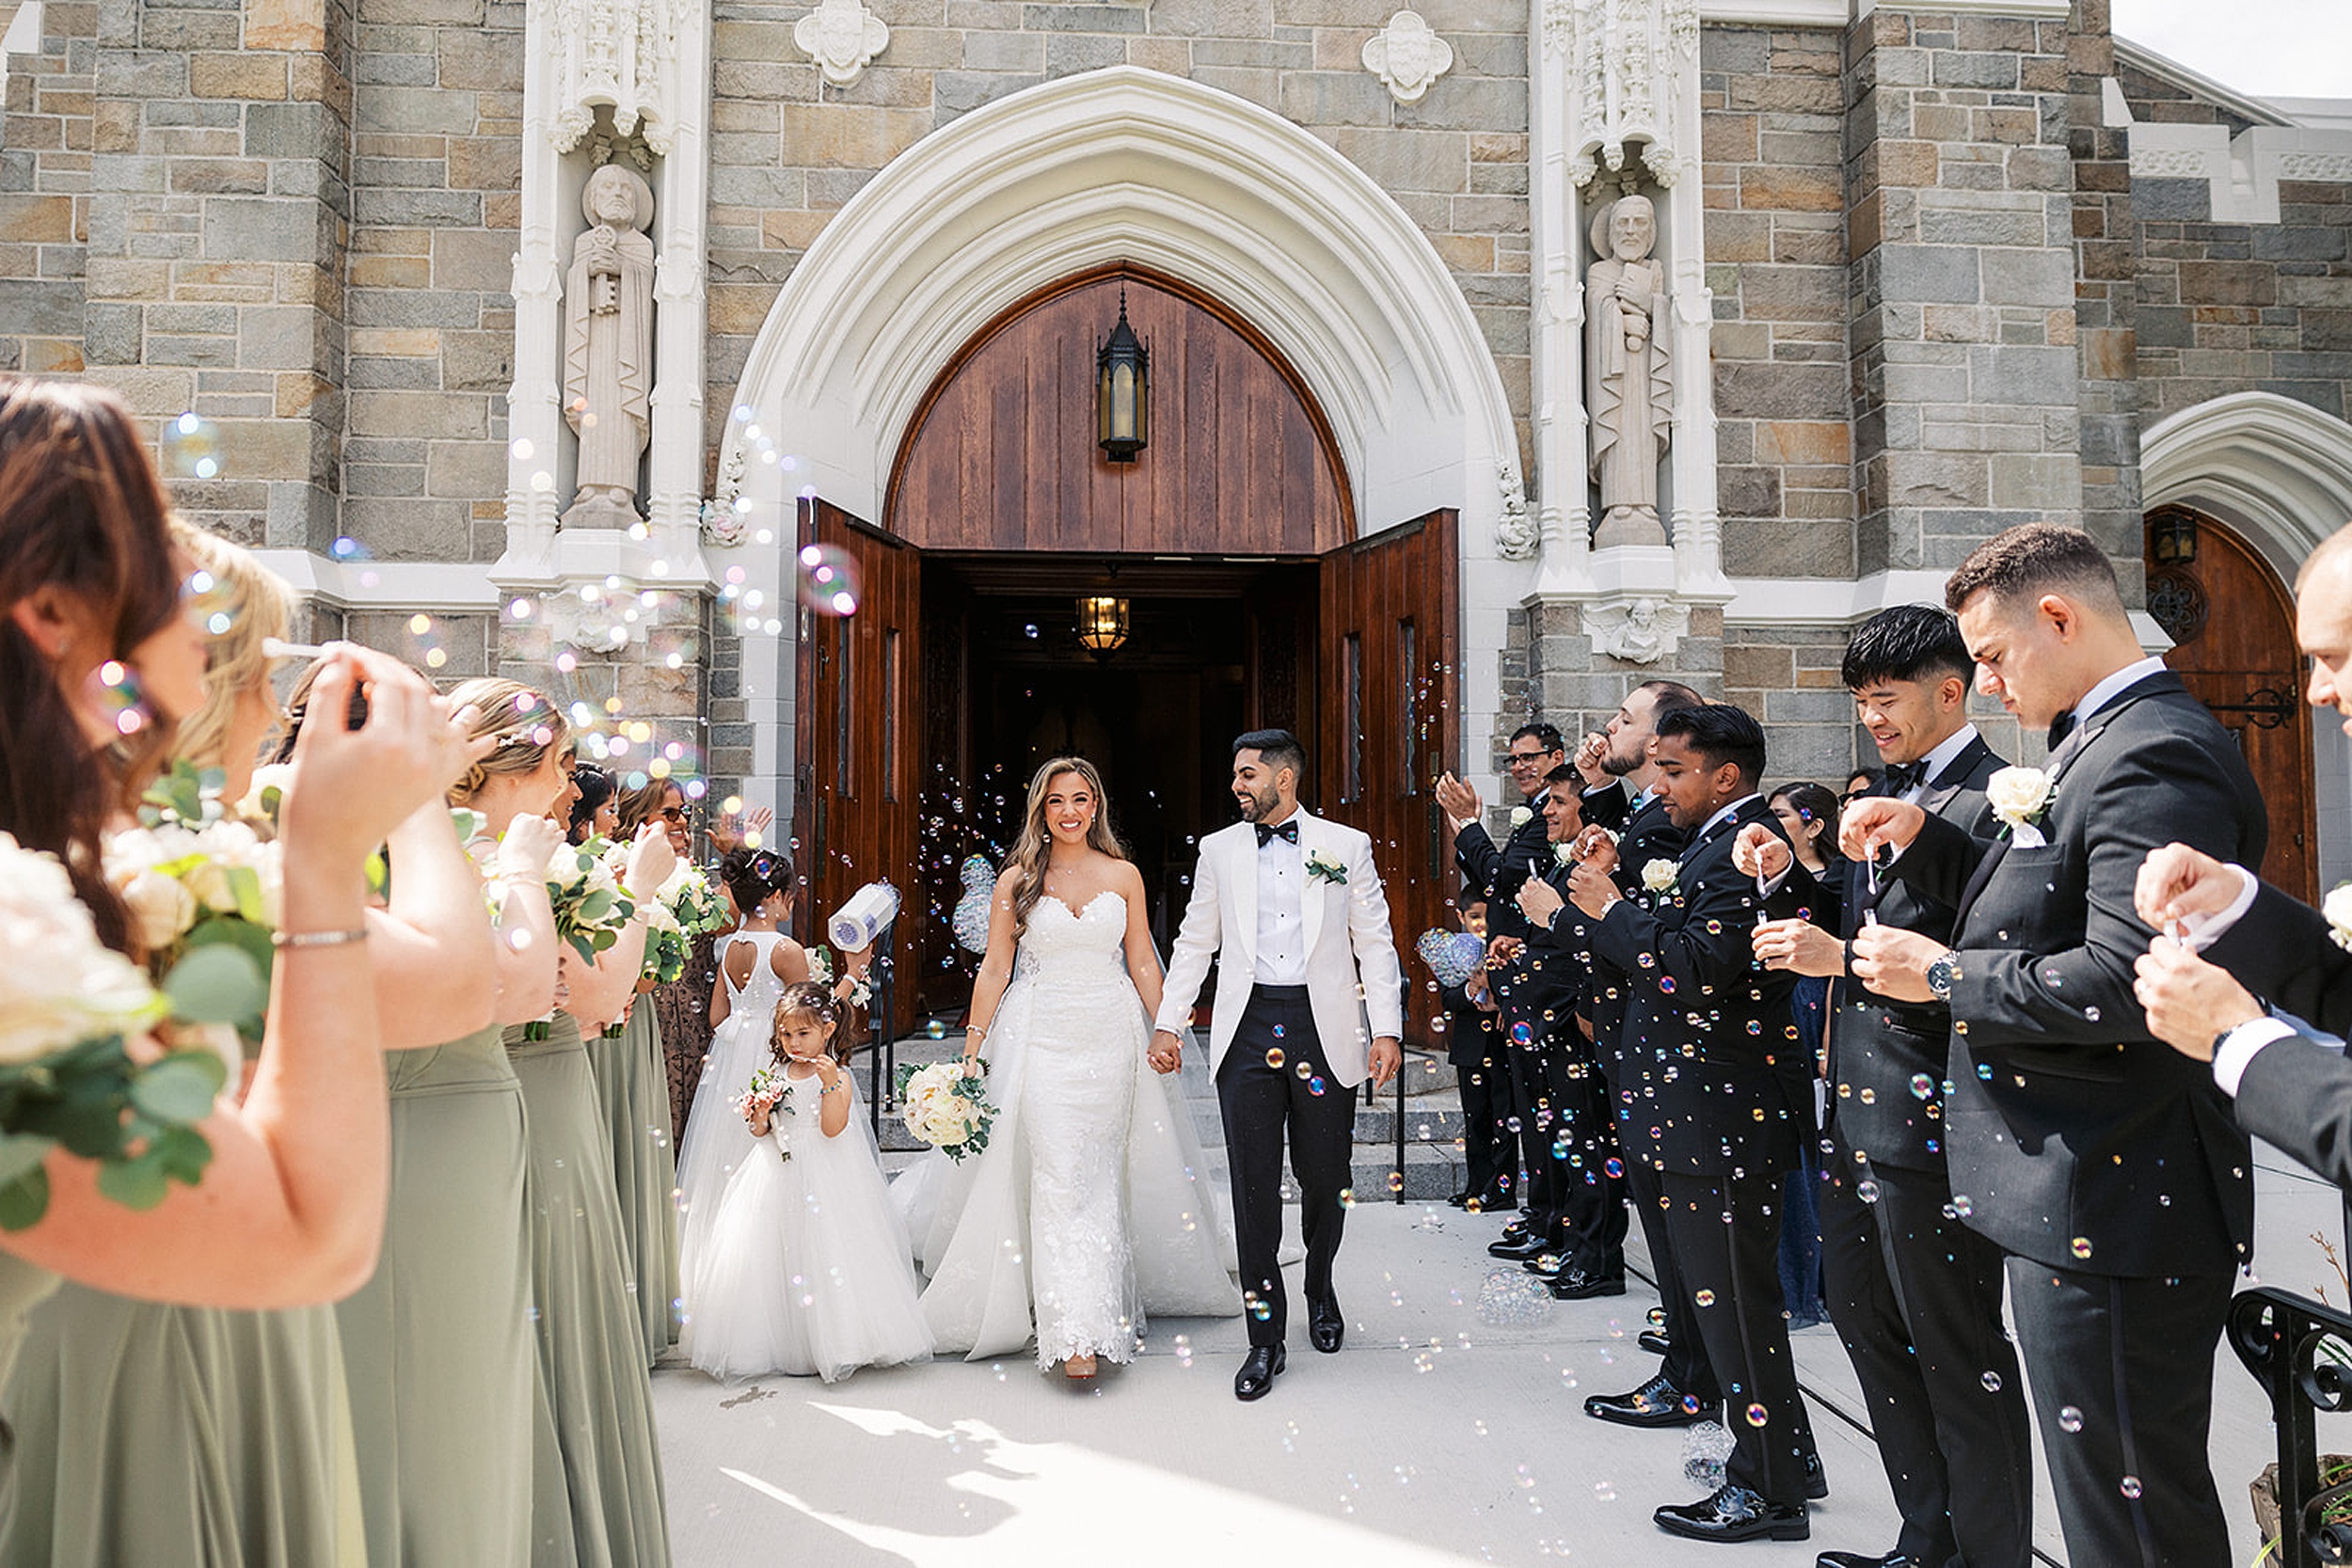 Newlyweds leave their wedding ceremony through large wooden doors while their wedding party blows bubbles over them at a valley regency wedding